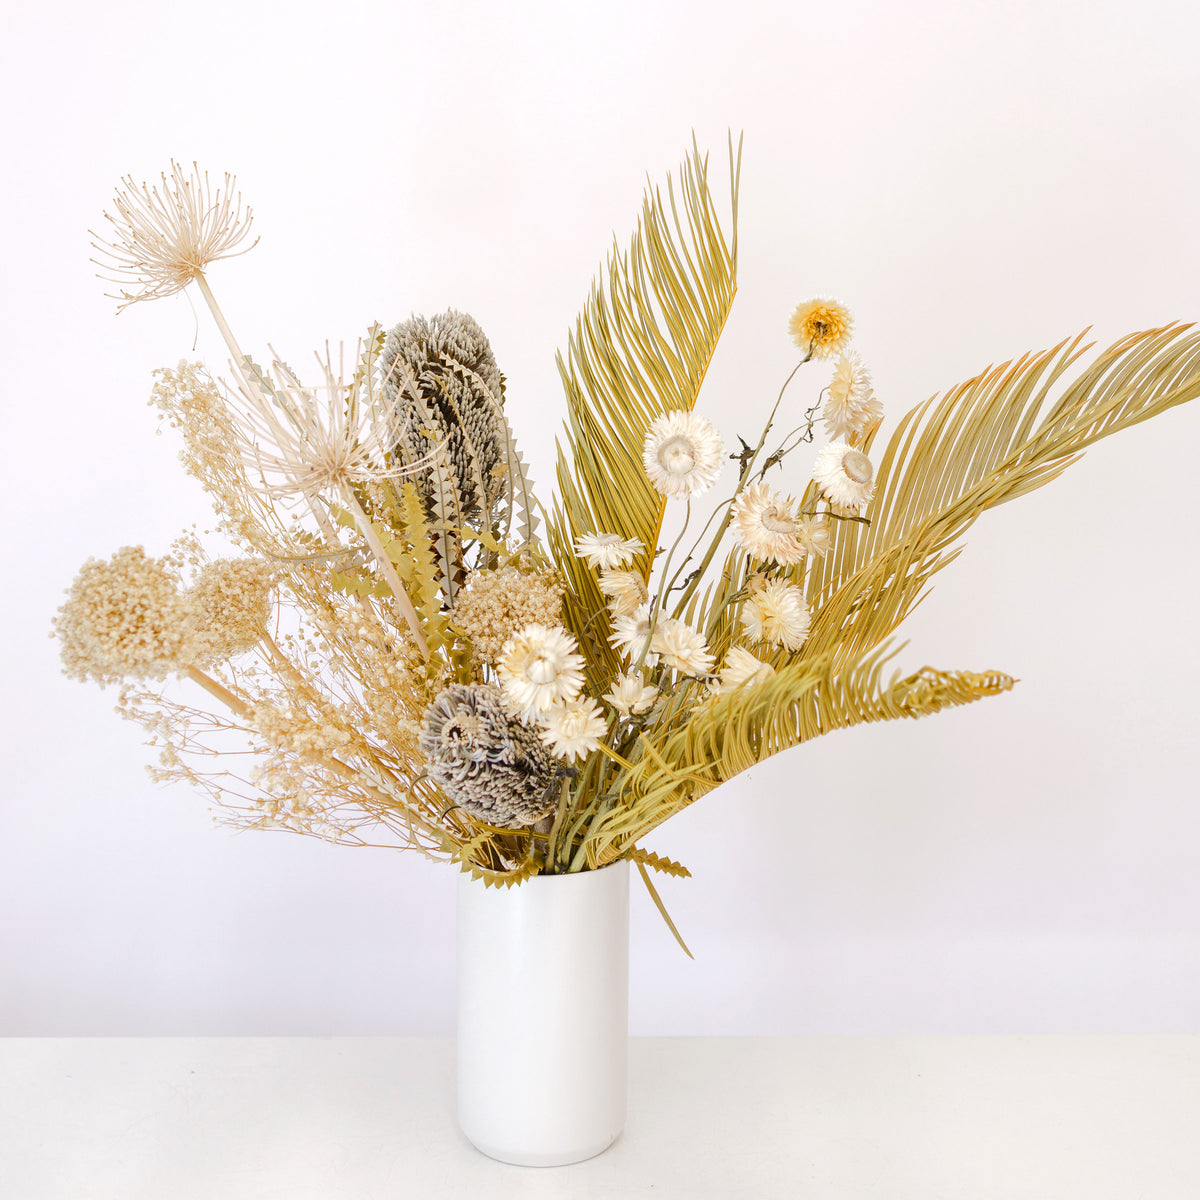 Dried Flowers for Vase Dried Plants Lavender Daisies Wild Meadow